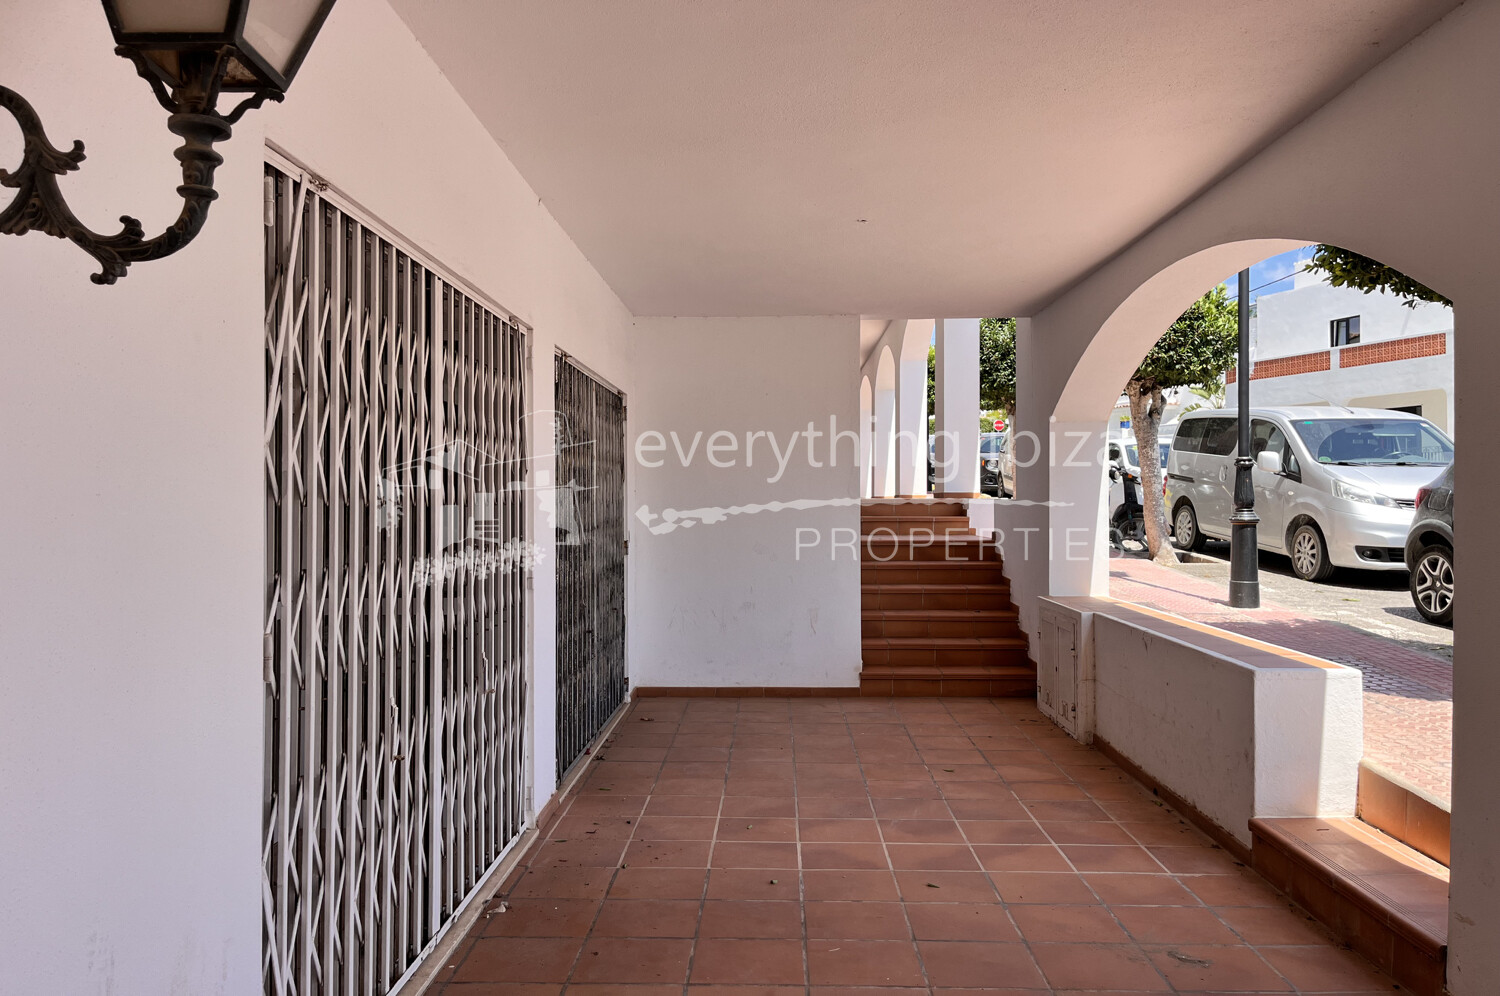 https://www.everythingibiza.com/properties/versatile-commer…of-san-jose-1640/,ref. 3, for sale in Ibiza by everything ibiza Properties